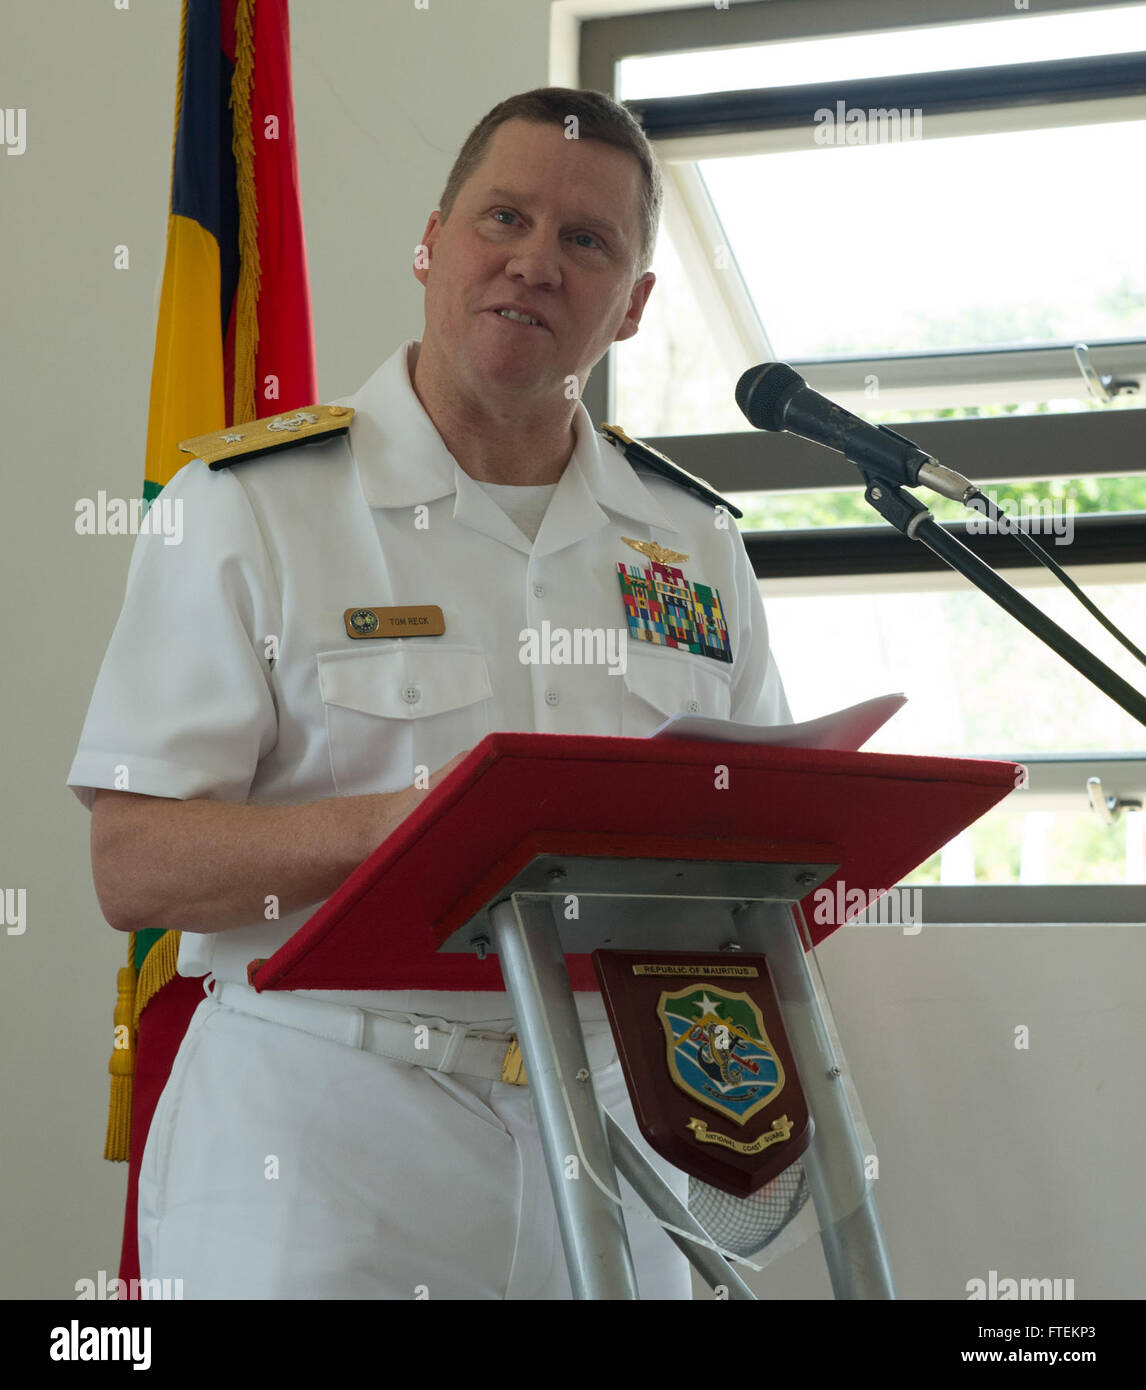 LE CHALAND, Mauritius (Feb. 4, 2015) Rear Adm. Tom Reck, vice commander, U.S. 6th Fleet, addresses exercise attendees at the Exercise Cutlass Express 2015 closing ceremony. Exercise Cutlass Express 2015, sponsored by U.S. Africa Command, is designed to improve regional cooperation, maritime domain awareness, and information sharing practices to increase capabilities of East African and Indian Ocean nations to counter sea-based illicit activity. (U.S. Navy photo by Mass Communication Specialist 1st Class David R. Krigbaum/Released) Stock Photo